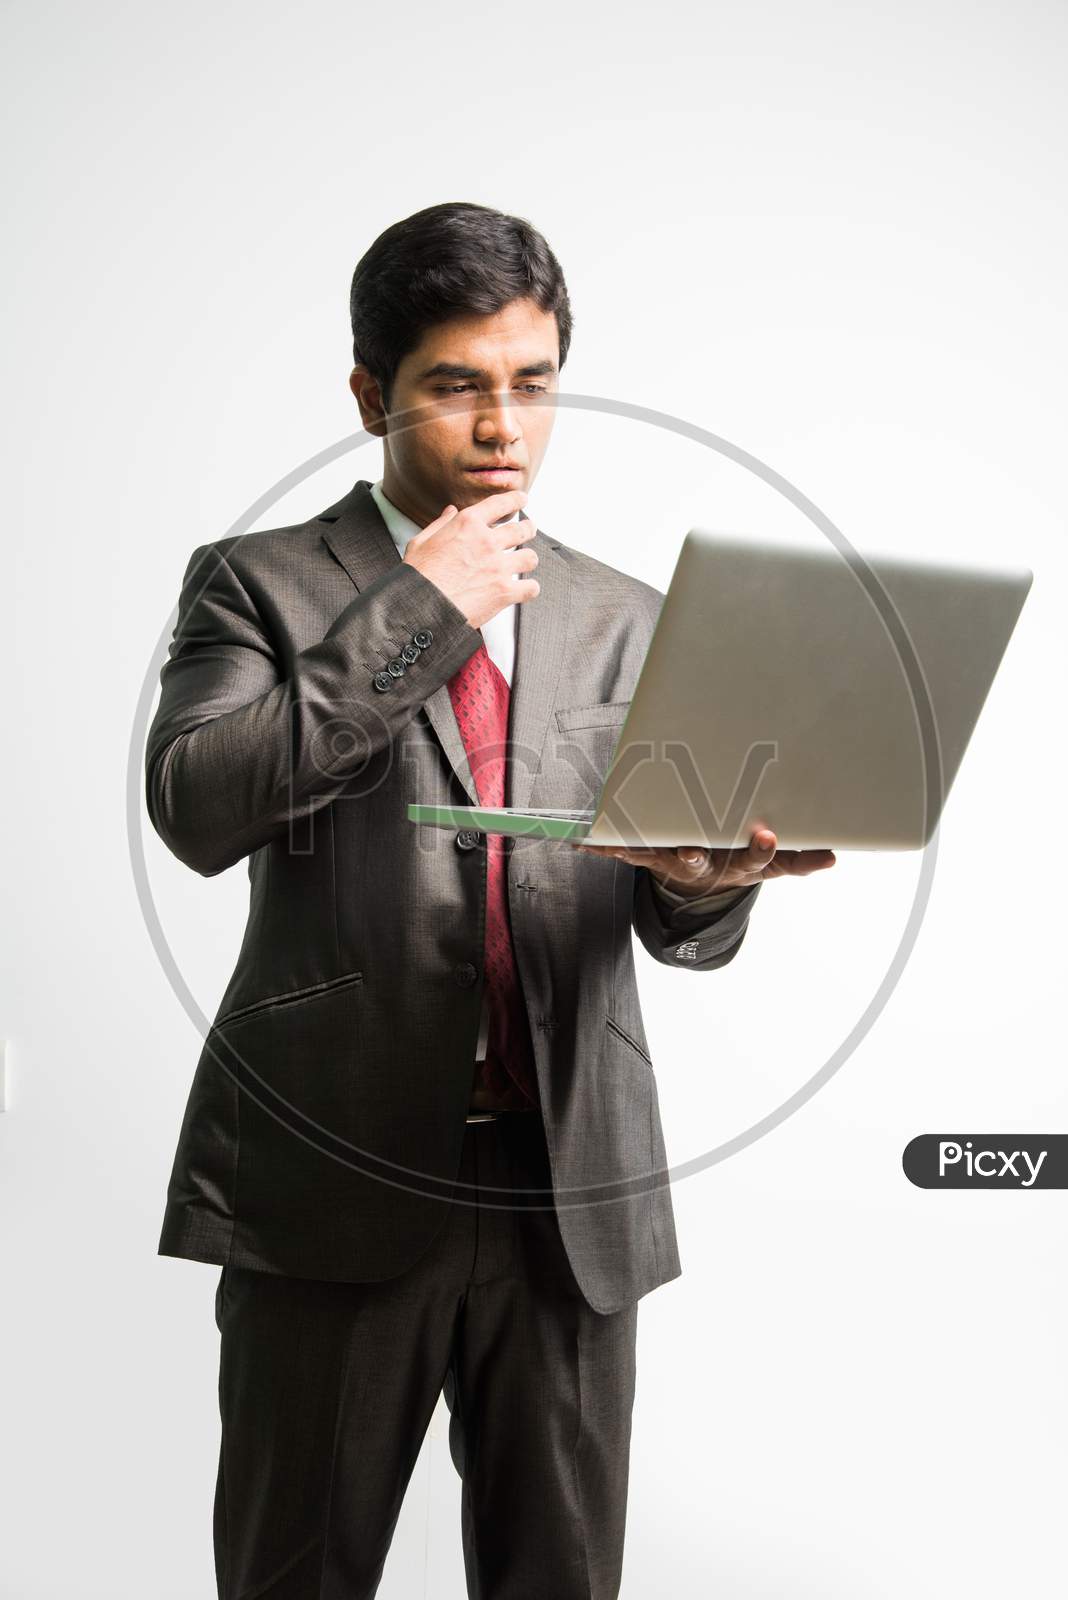 Indian young businessman with laptop computer